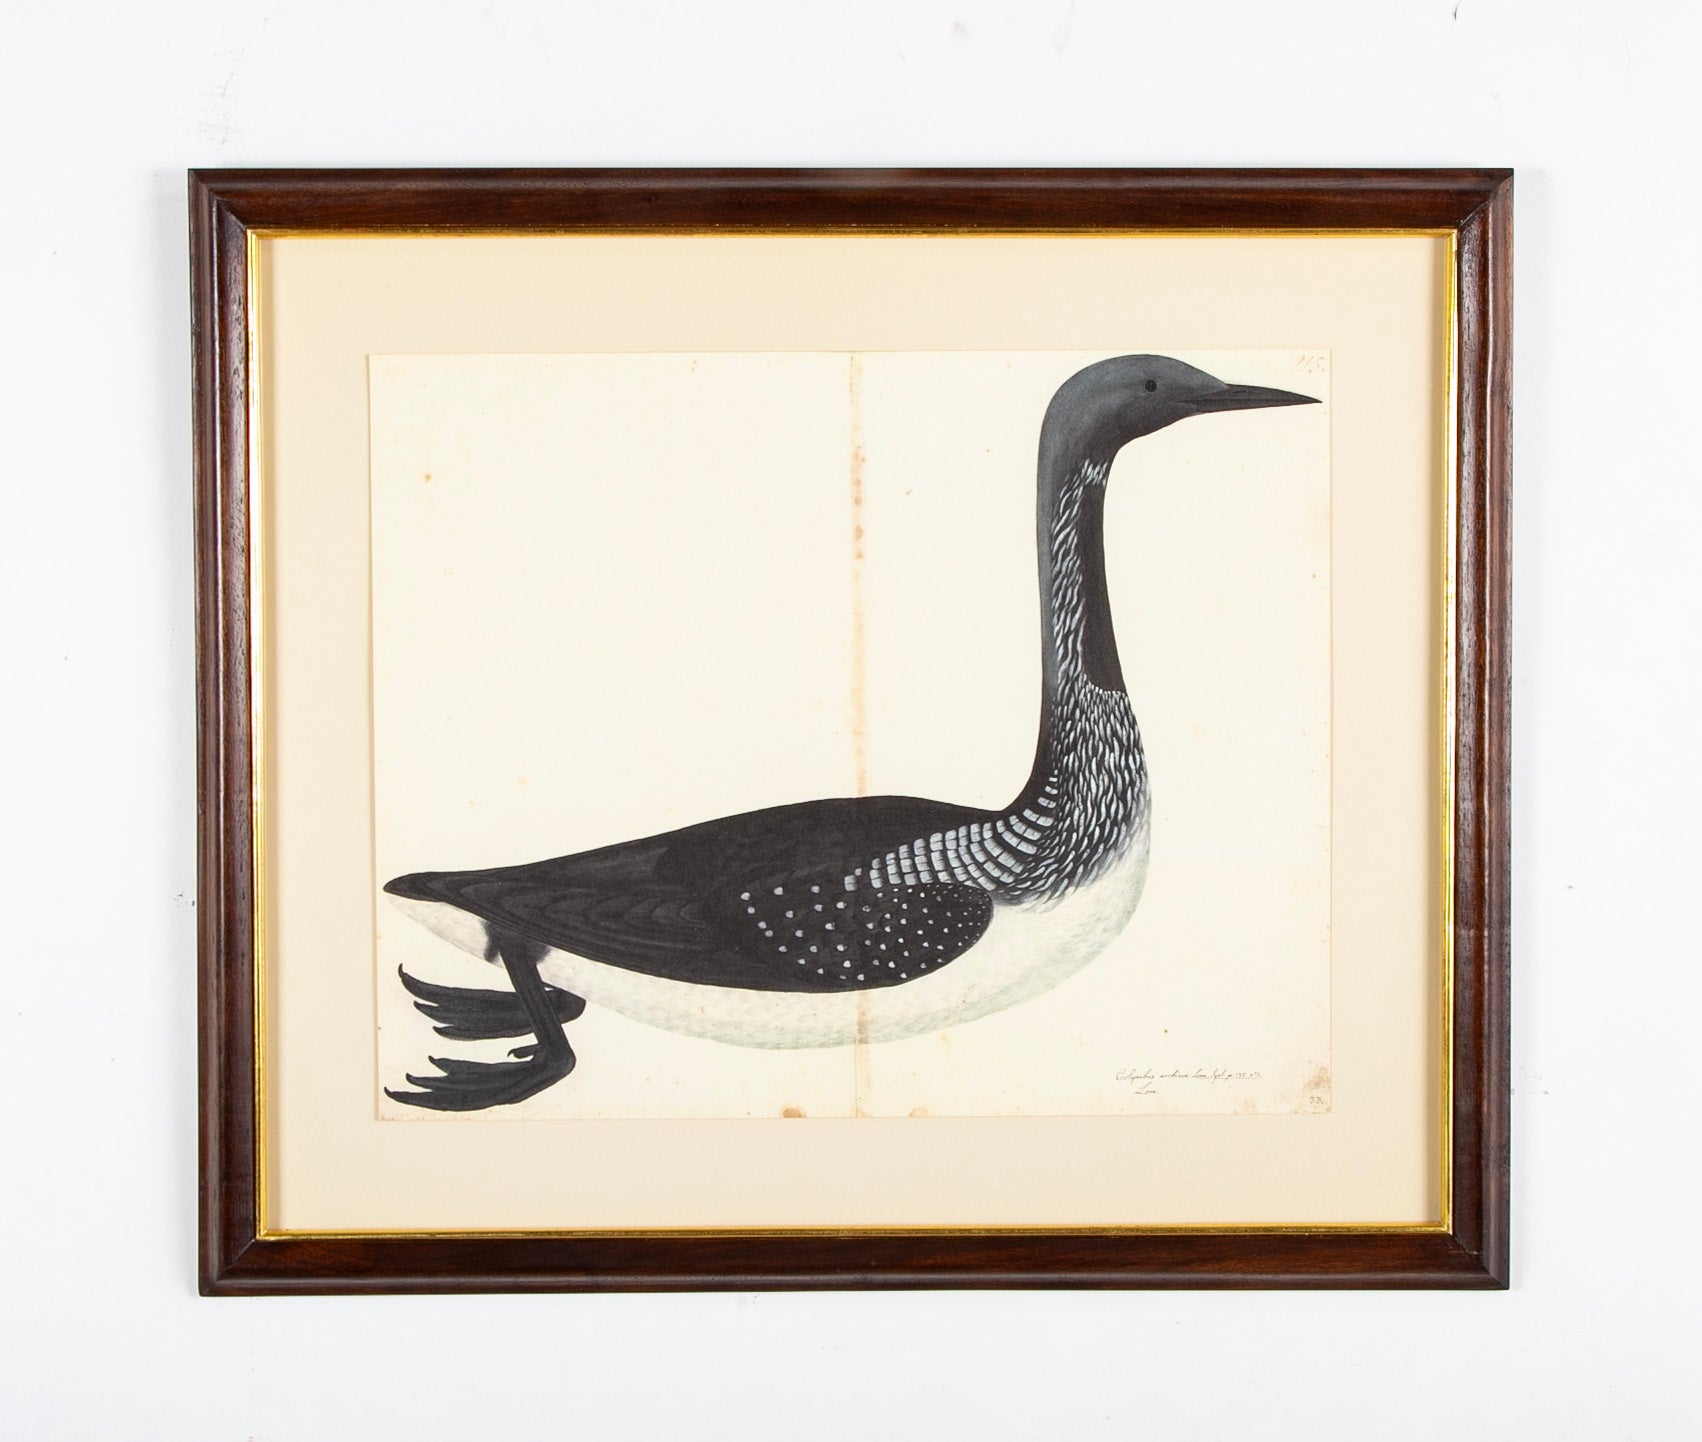 Offset Lithograph of "Black Throated Diver" from the "The  Great Bird Book" by Olof Rudbeck The Younger